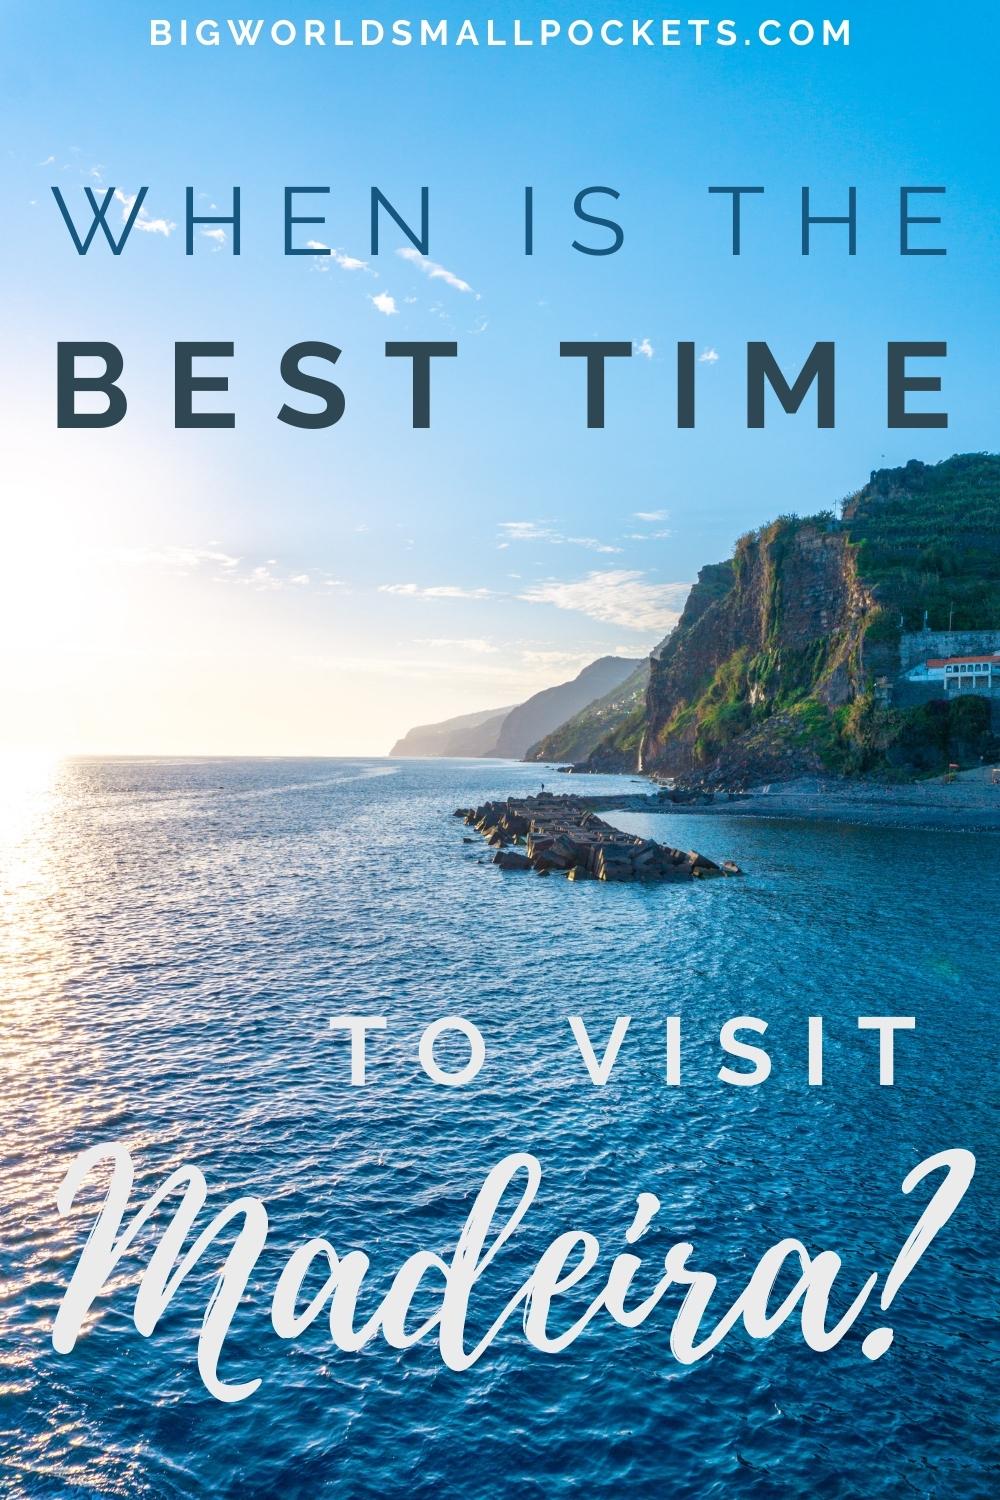 When is the Best Time to Visit Madeira